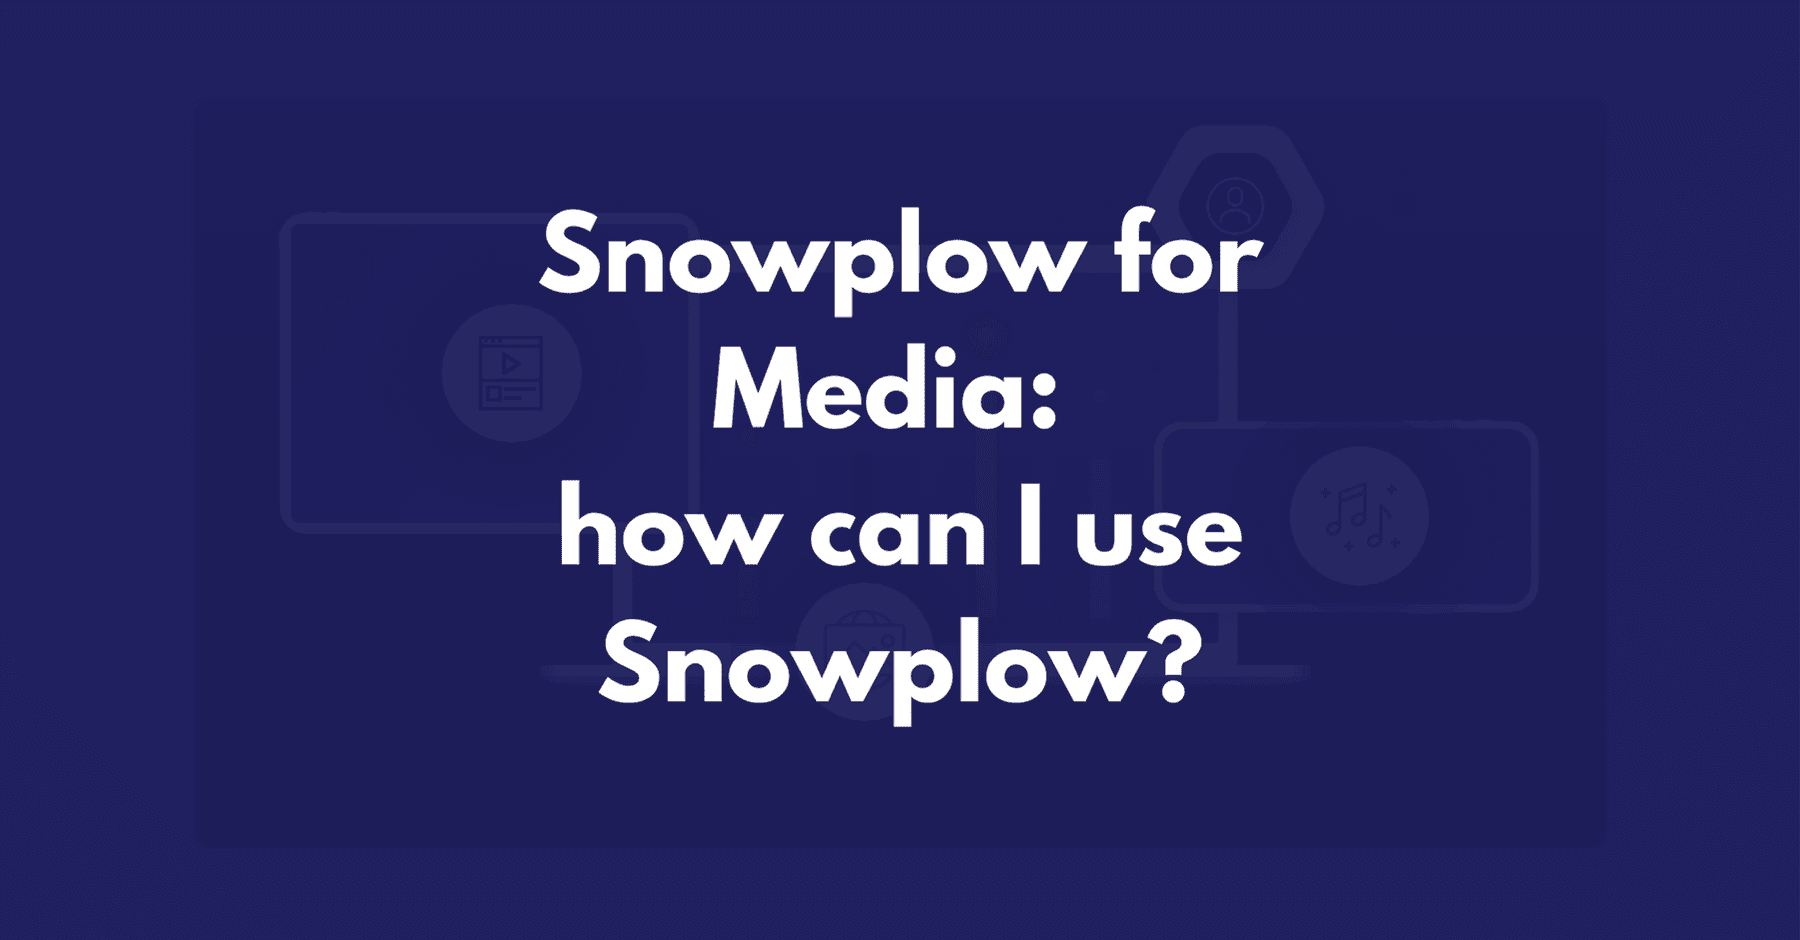 Snowplow for Media part 1: how can I use Snowplow?